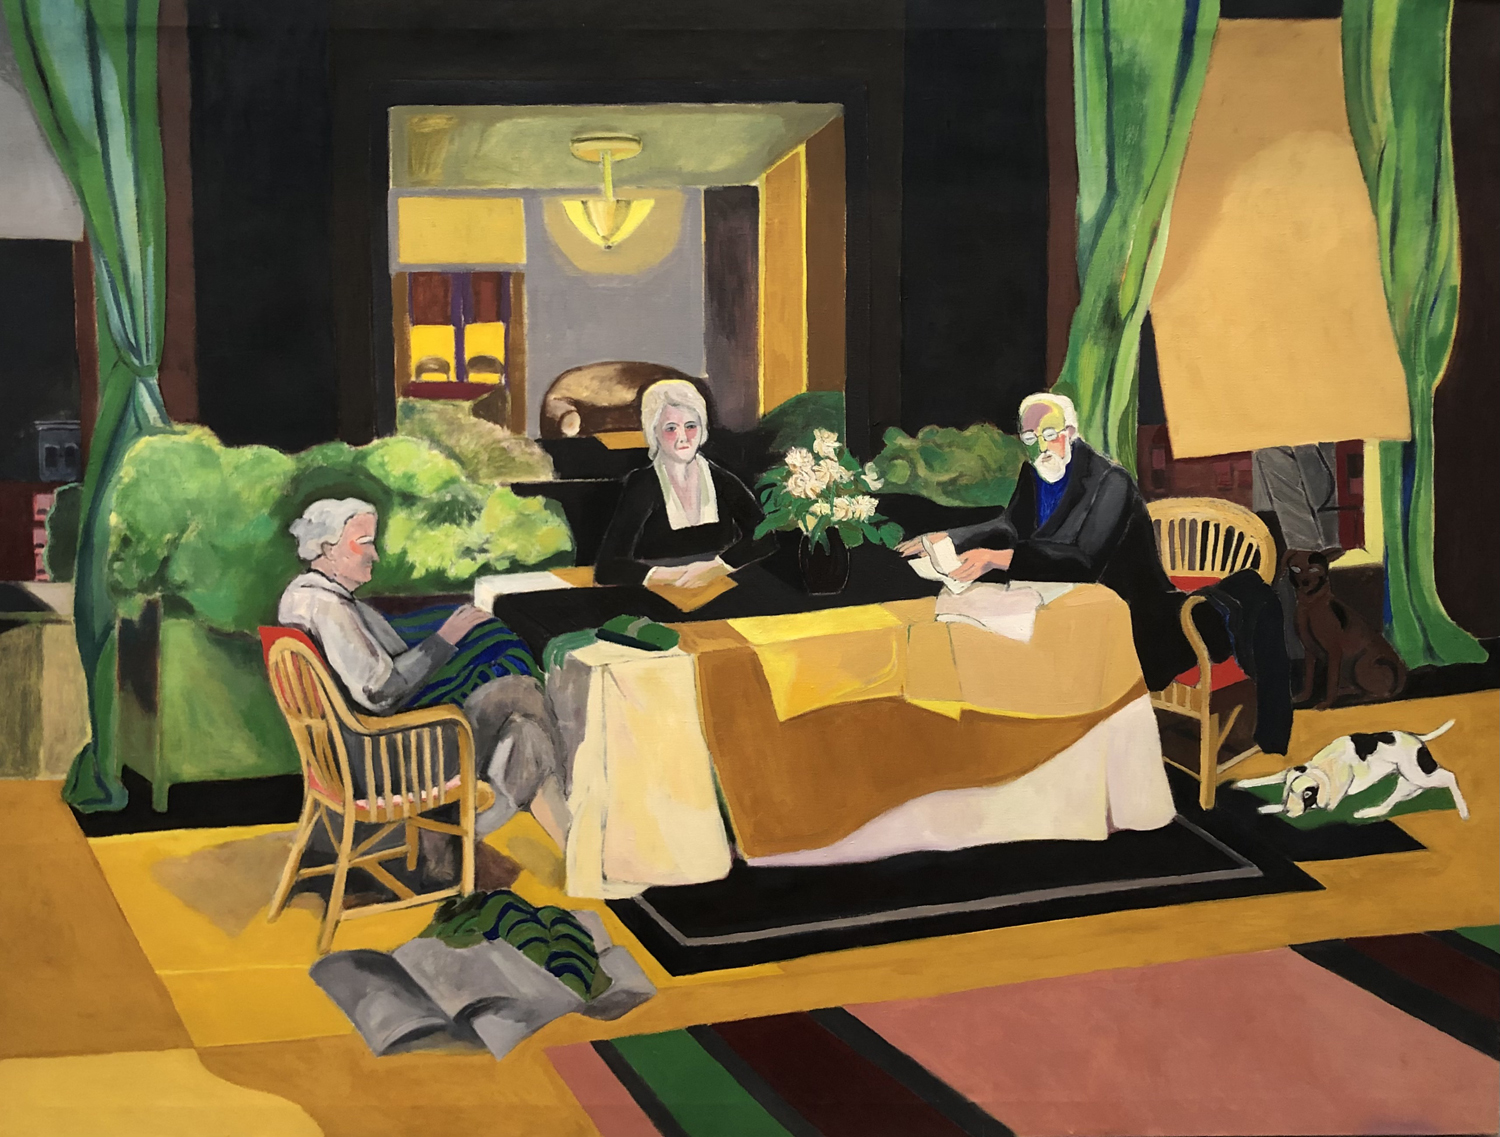 Dining Room (The Freud Family): Painting of the Sigmund Freud Family by Ethel Fisher, 1966, oil on canvas, 52 x 68 inches, mid-twentieth century figure painting.